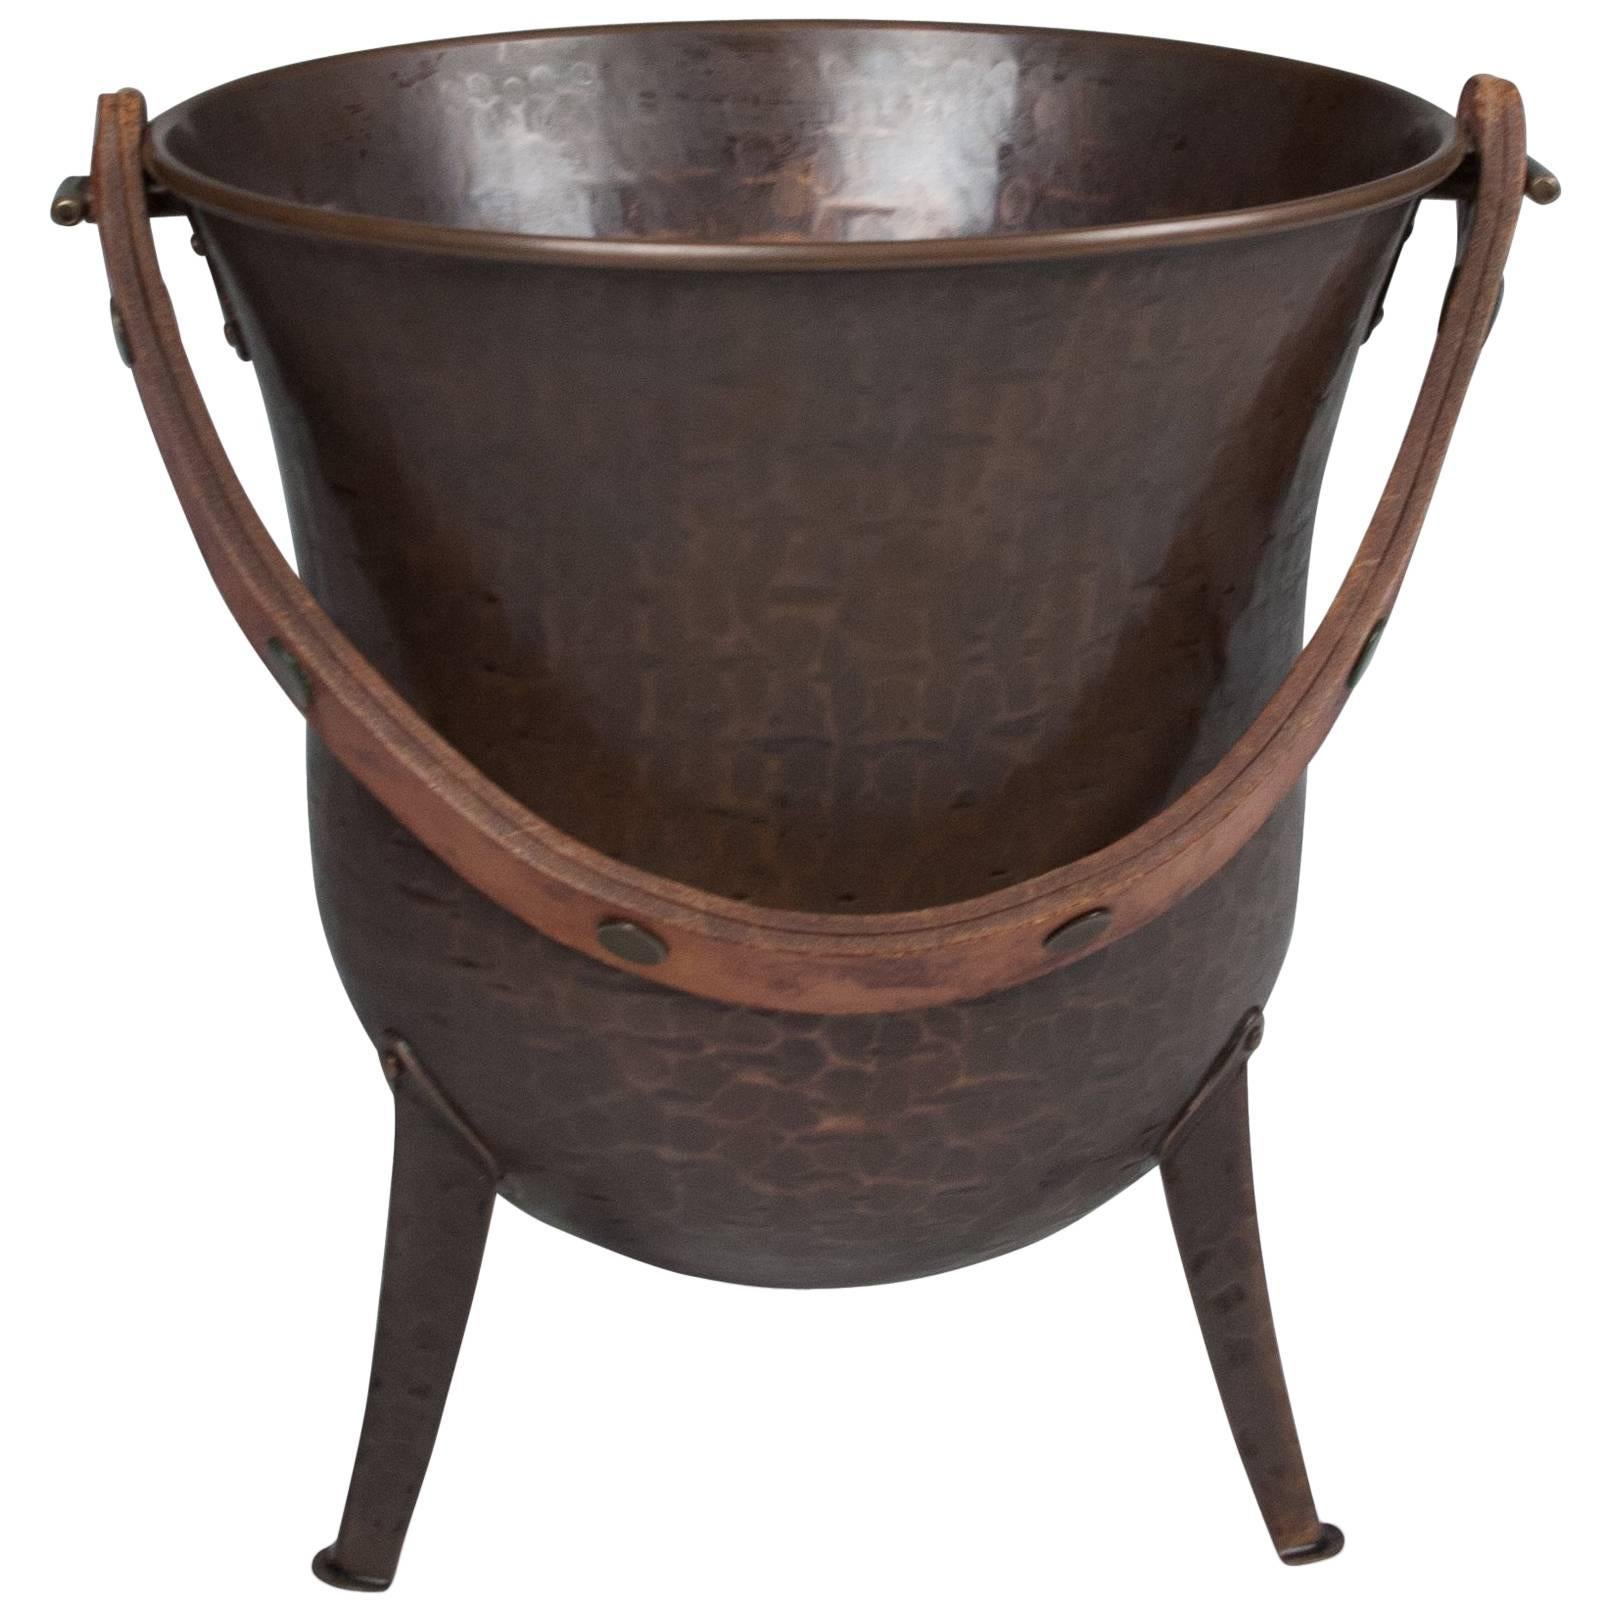 Textured and Patinated Copper Metal Bucket, German, 1930s